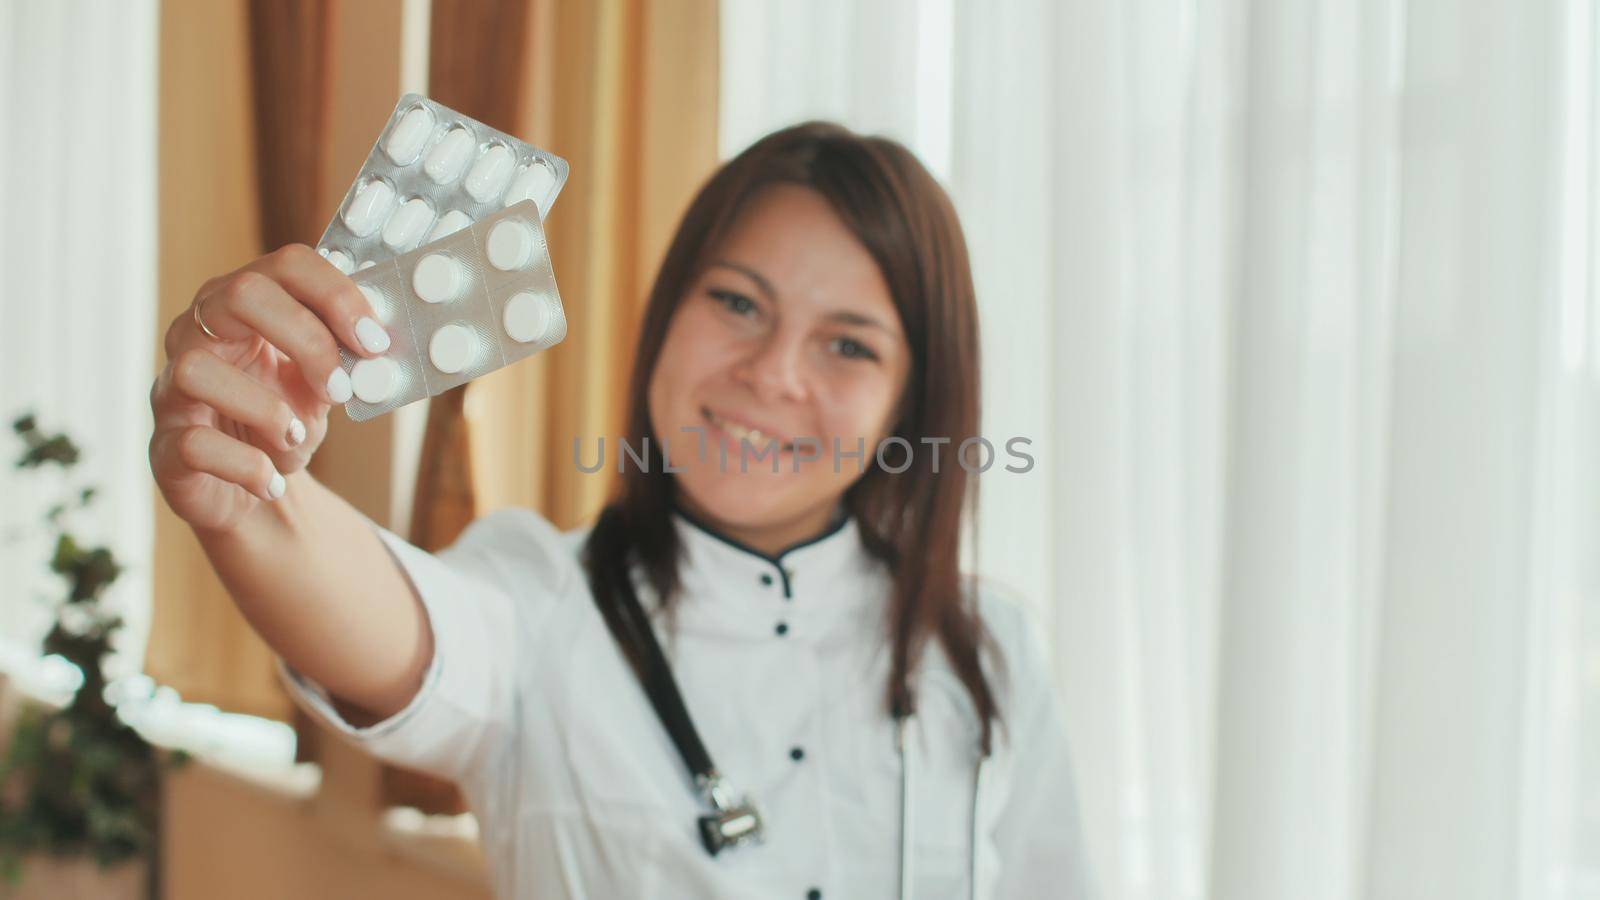 A young girl doctor demonstrates in the hands of a package of pills. by DovidPro